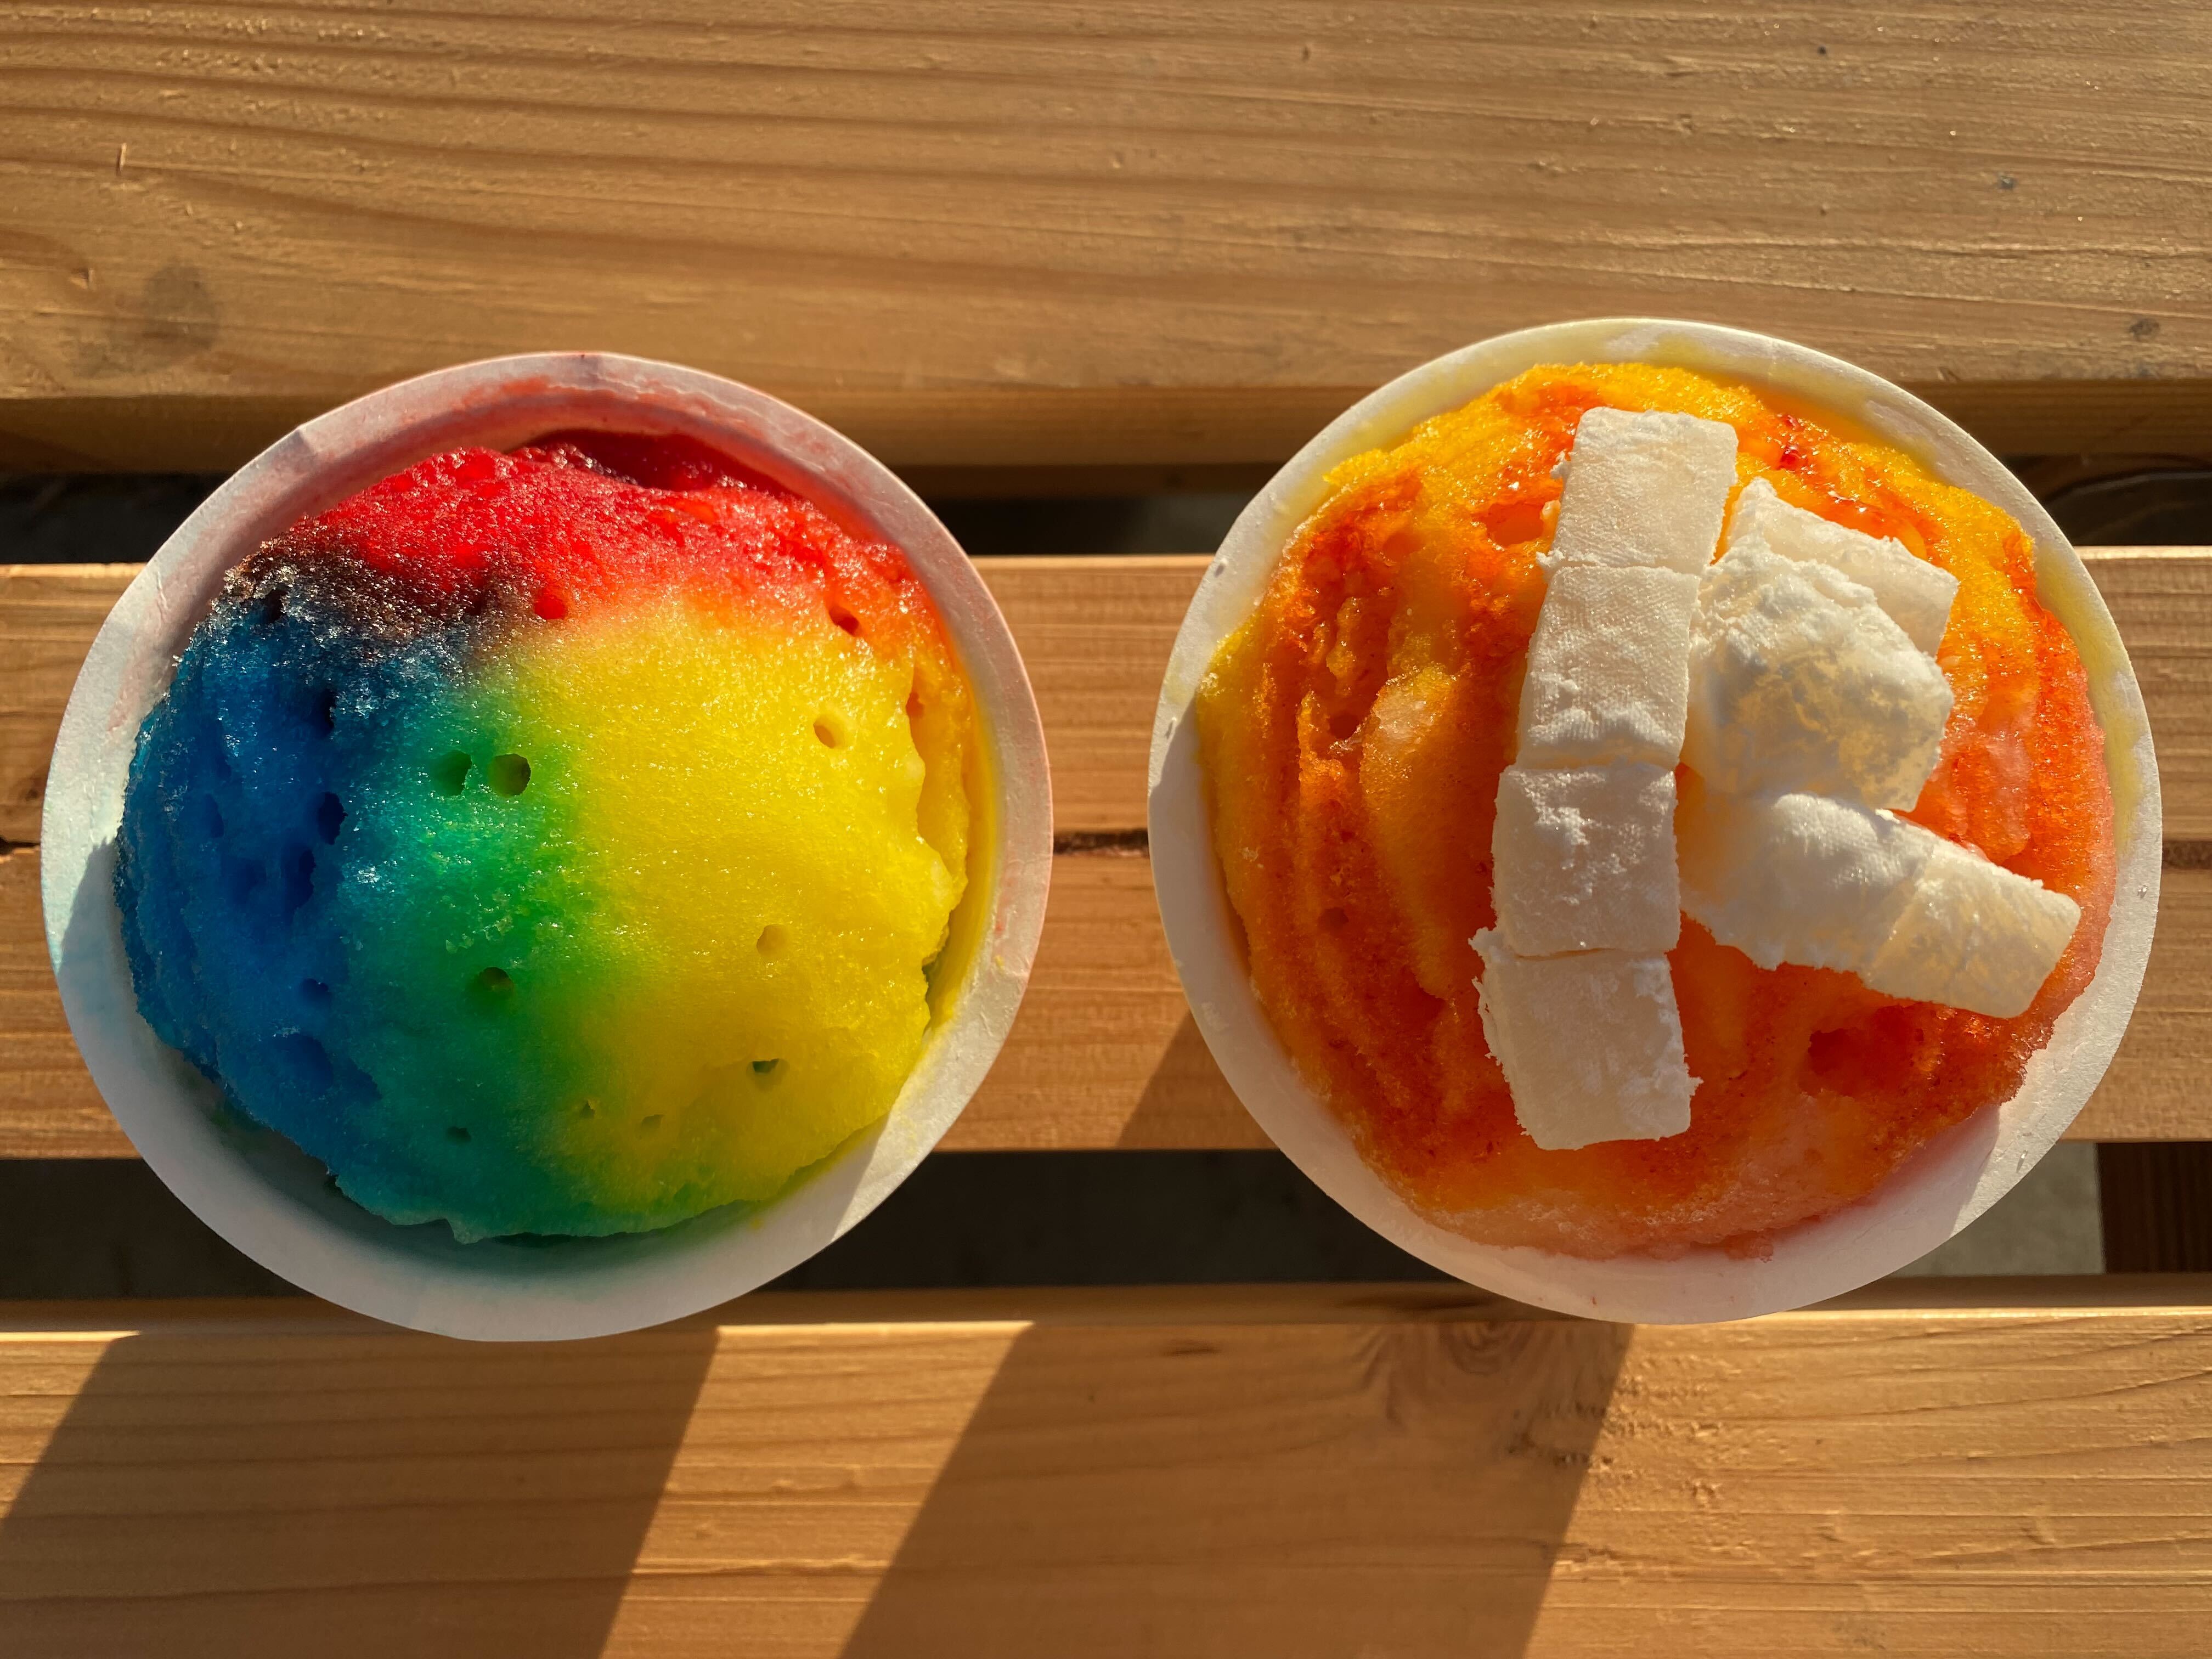 A rainbow covered shave ice cup and an orange-pink shave ice cup with cubes of white mochi on top.